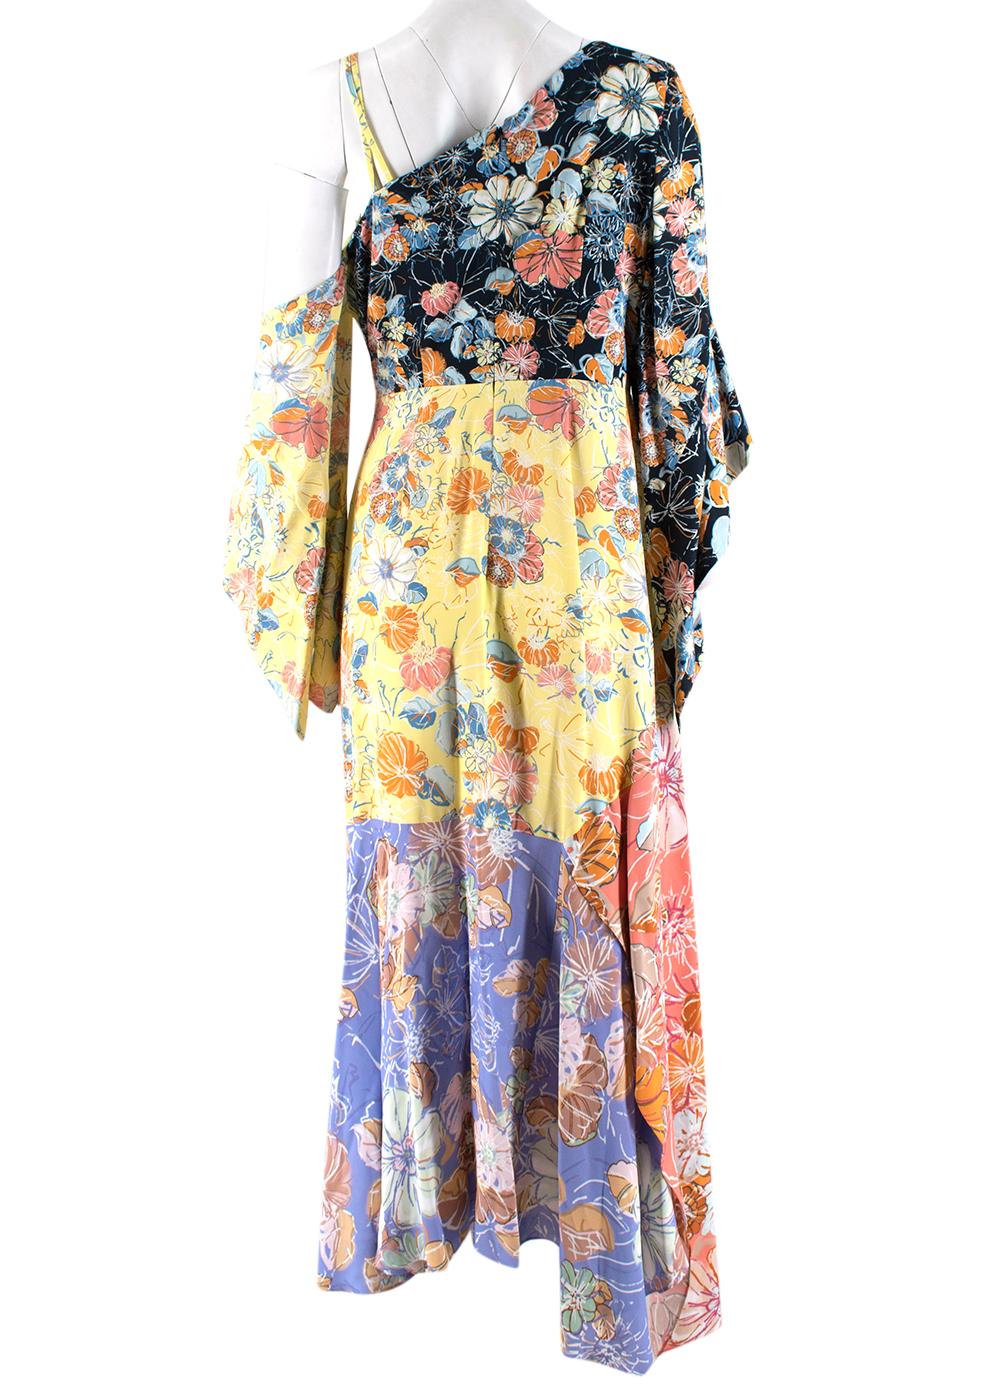 Peter Pilotto Floral Print Crepe De Chine Maxi Wrap Dress - Size US 10 In Excellent Condition For Sale In London, GB